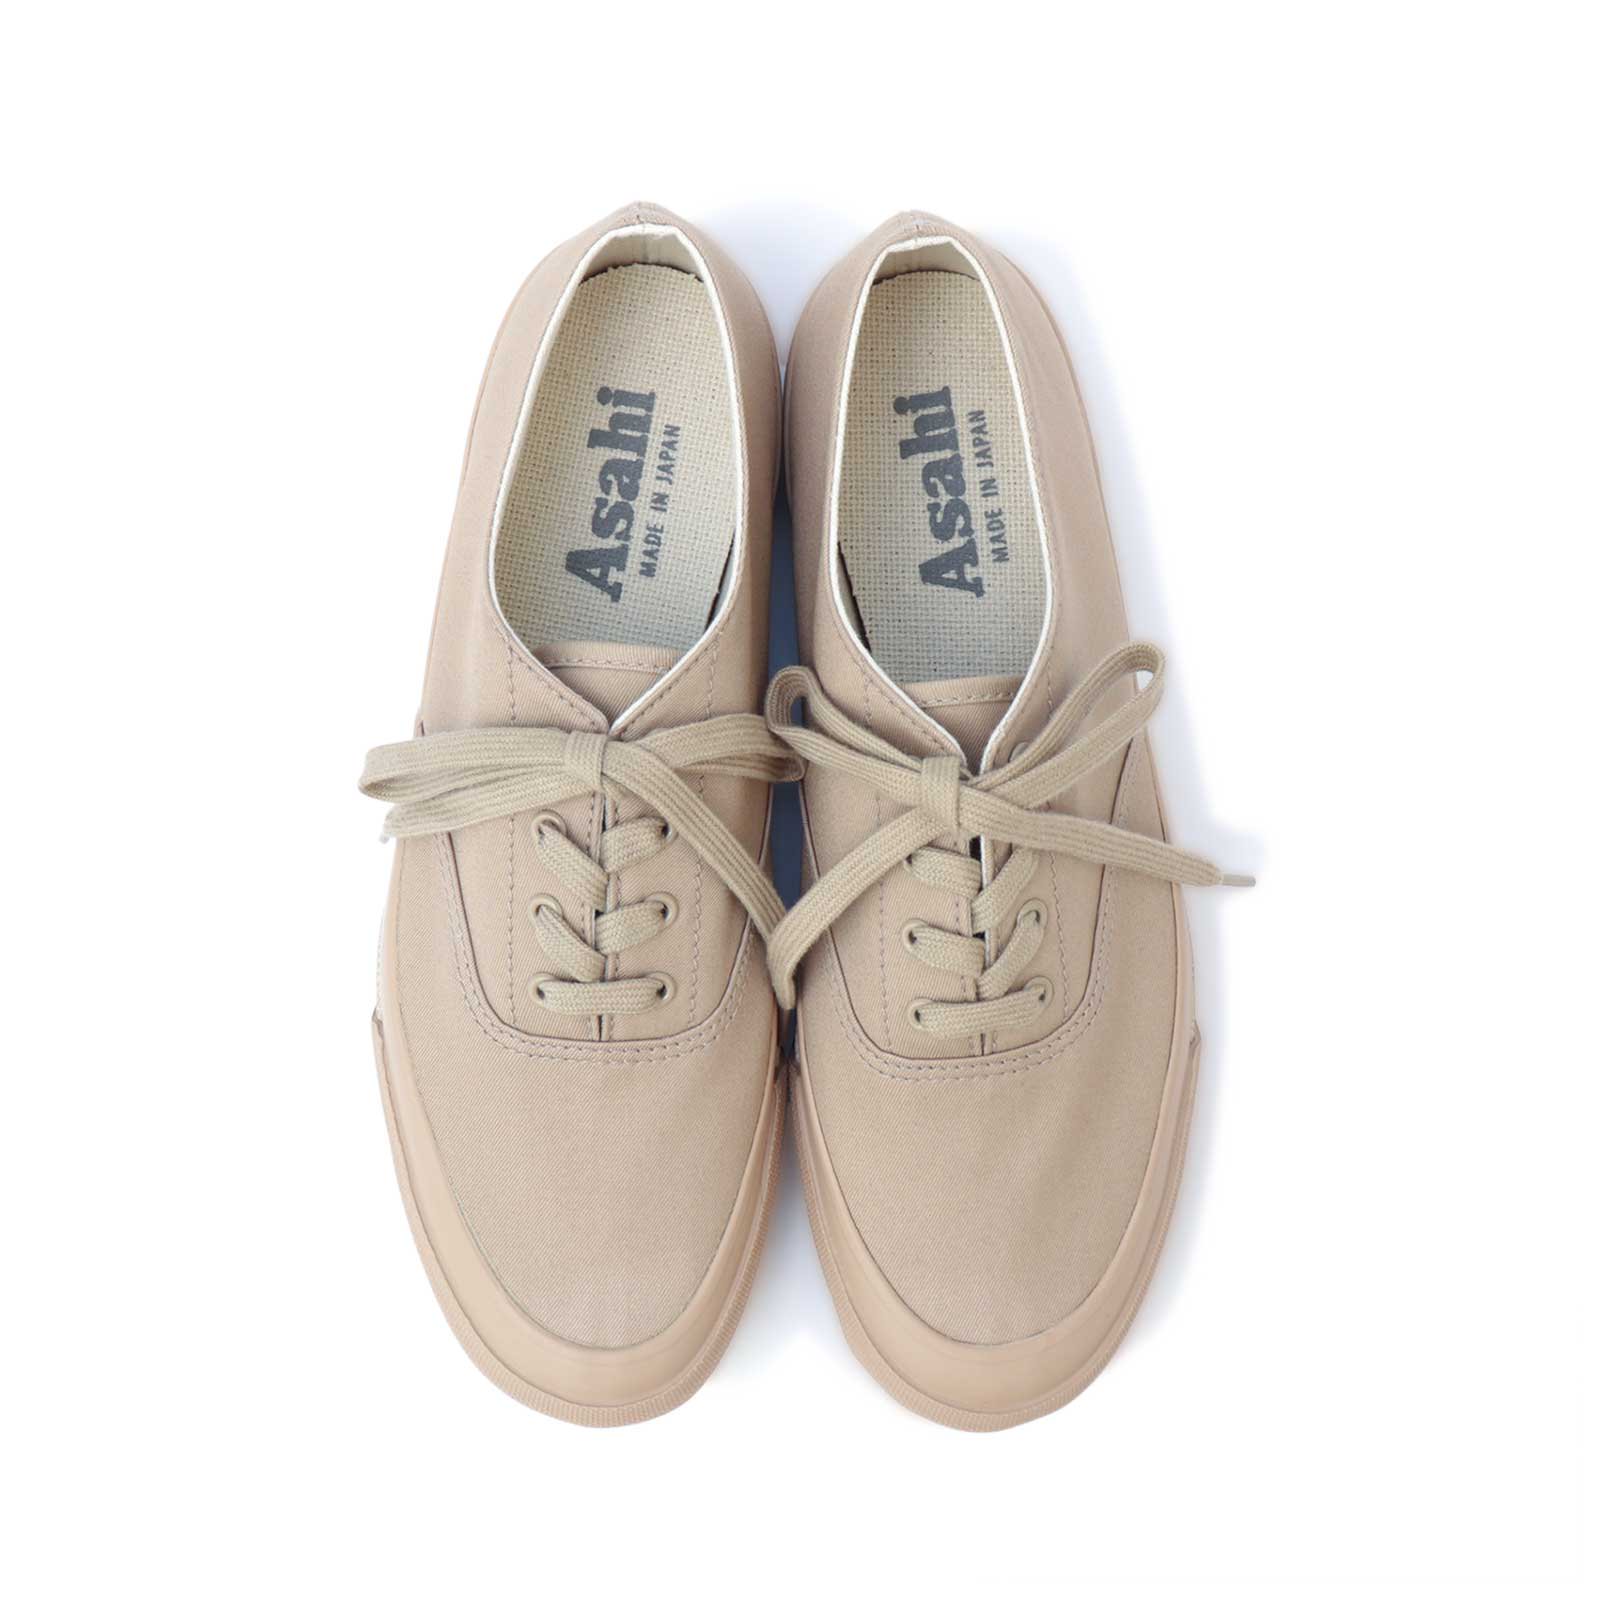 <img class='new_mark_img1' src='https://img.shop-pro.jp/img/new/icons34.gif' style='border:none;display:inline;margin:0px;padding:0px;width:auto;' />ASAHI DECK WOMEN<br>VENTILE - BEIGE<br>22.5cm25cm